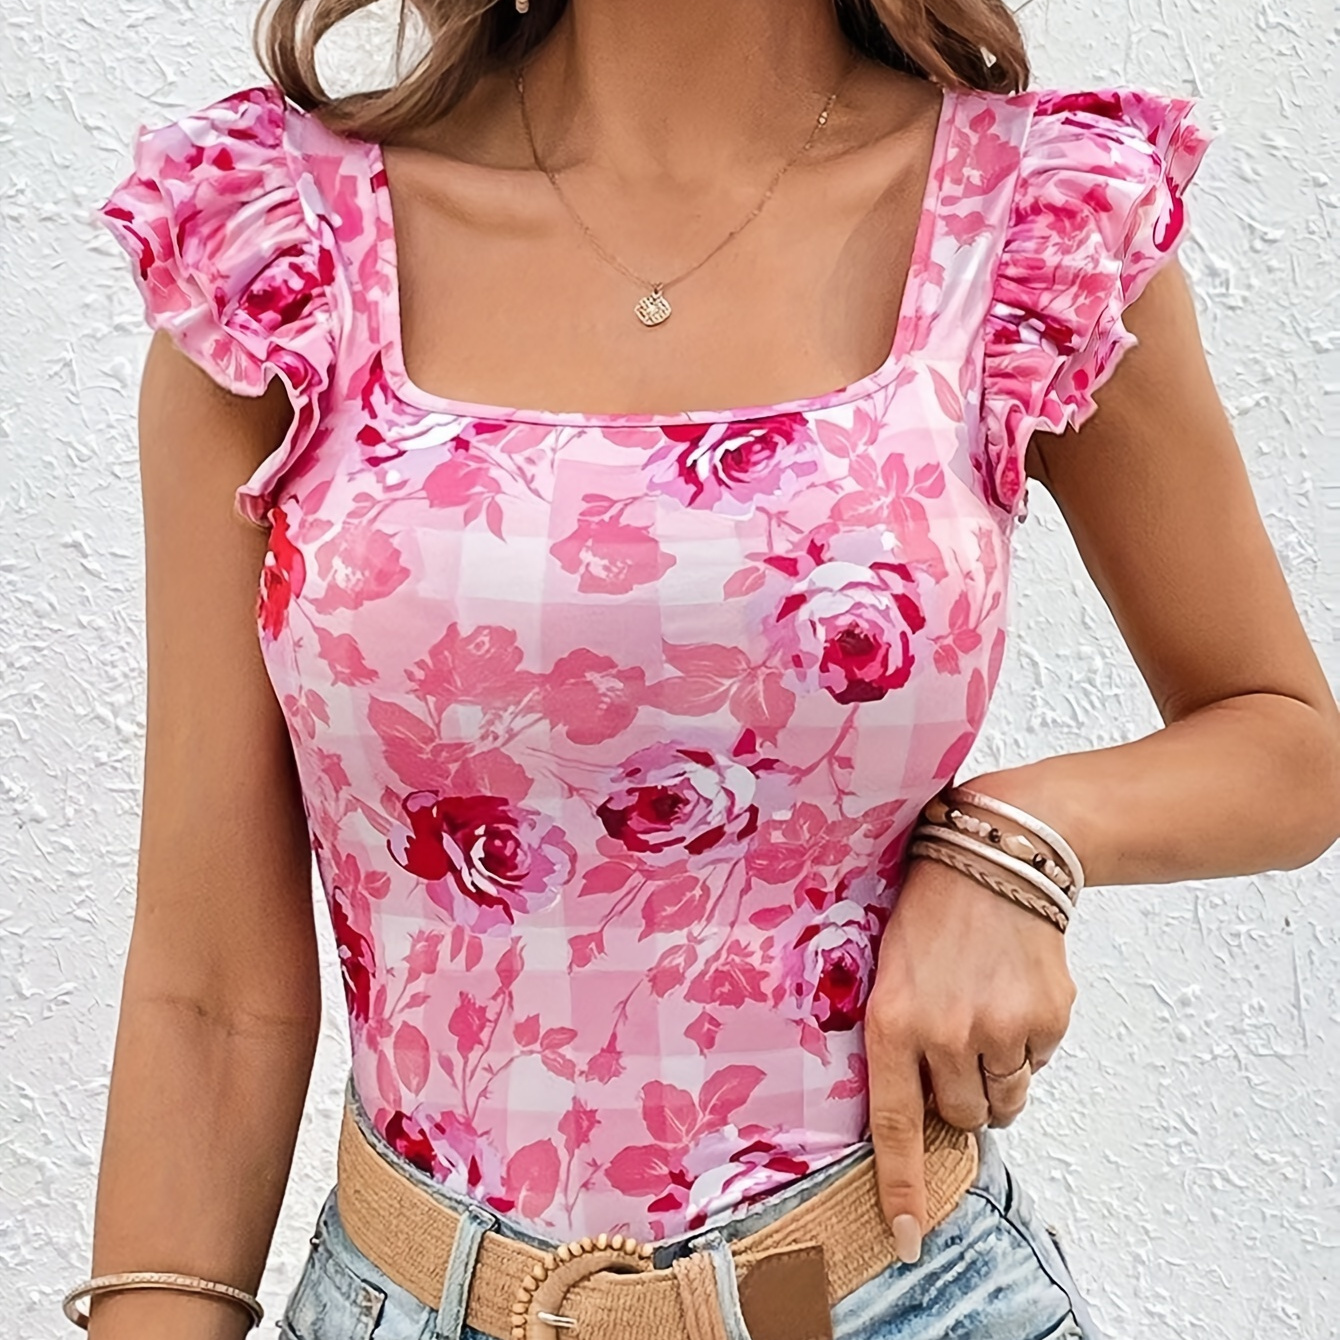 

Floral Print Square Neck T-shirt, Elegant Layered Ruffle Trim Slim Top For Spring & Summer, Women's Clothing